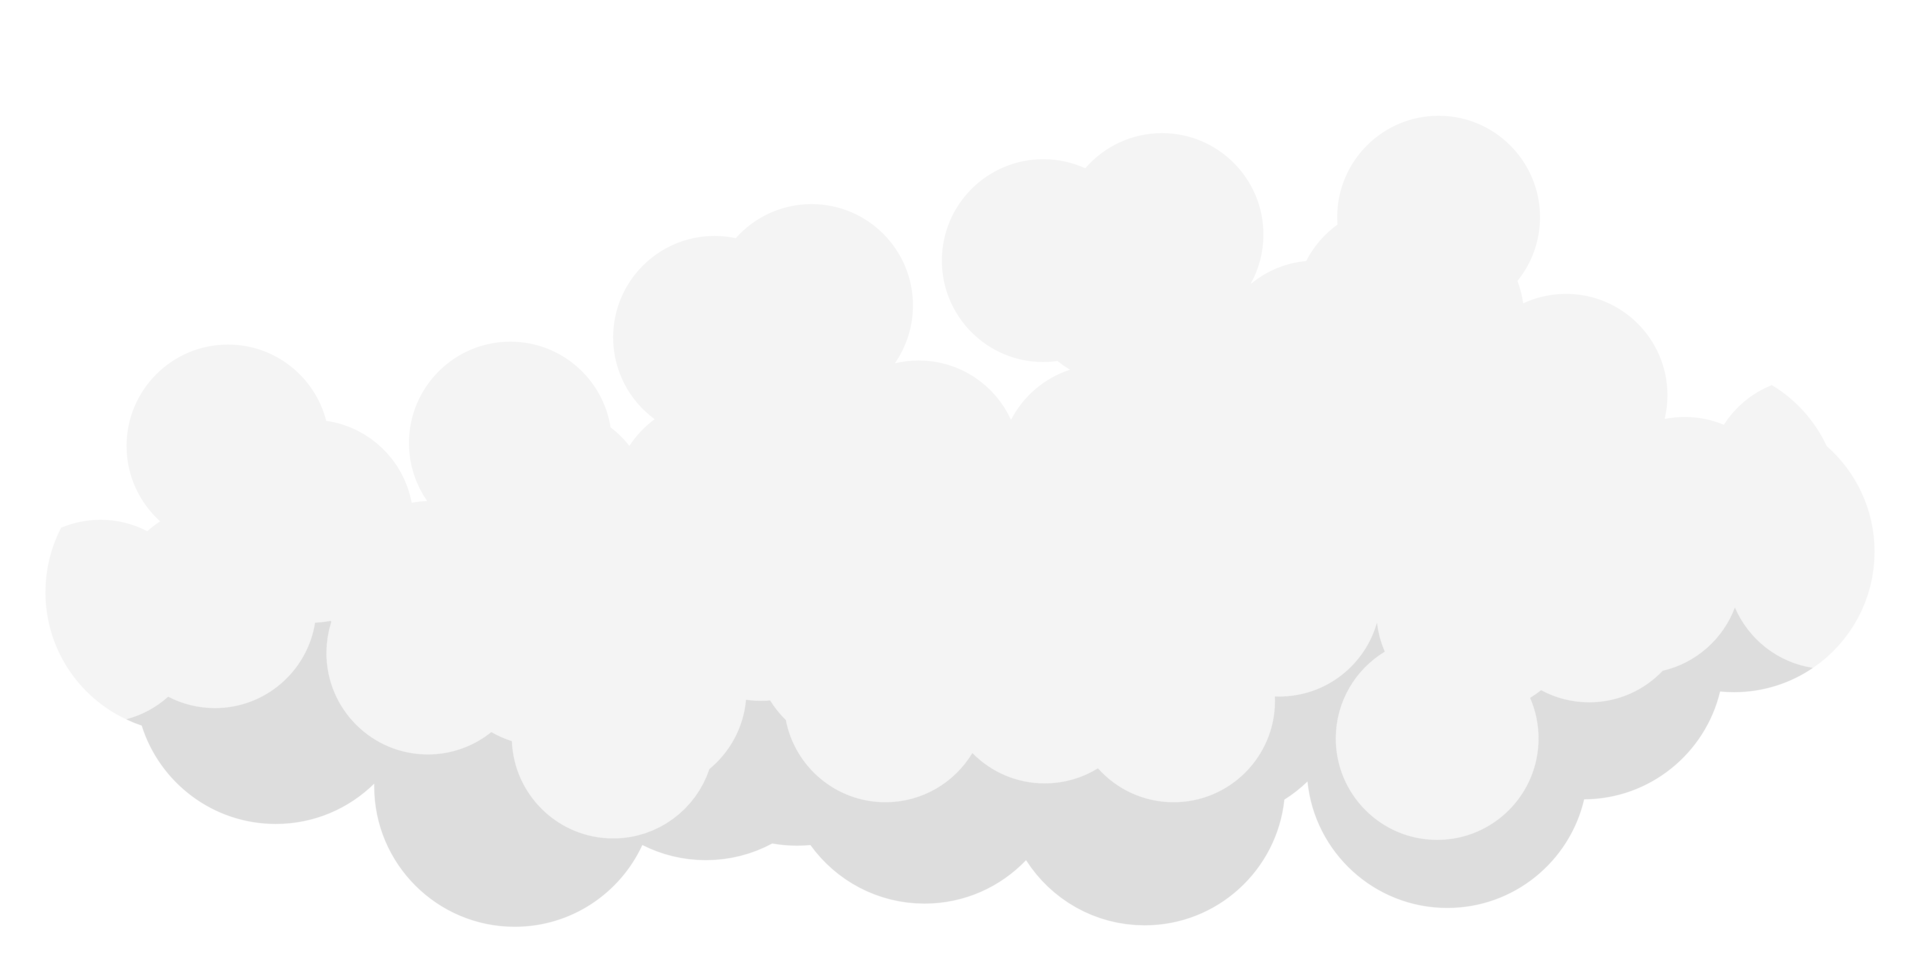 Free cartoon cloud illustration 13166974 PNG with Transparent Background